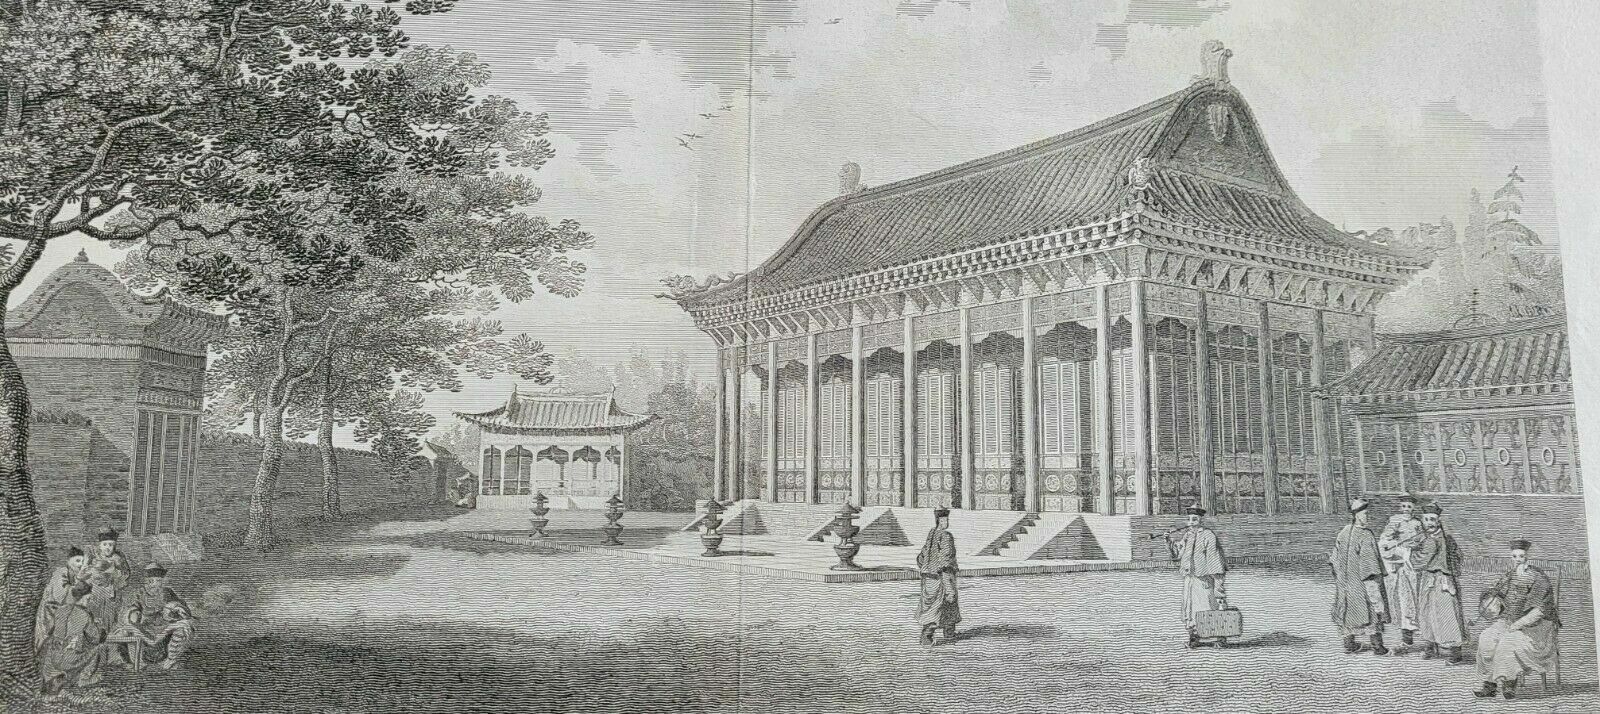 RARE IMPERIAL CHINESE EMPEROR VINTAGE ENGRAVING 18TH CENTURY PALACE ORIGINAL